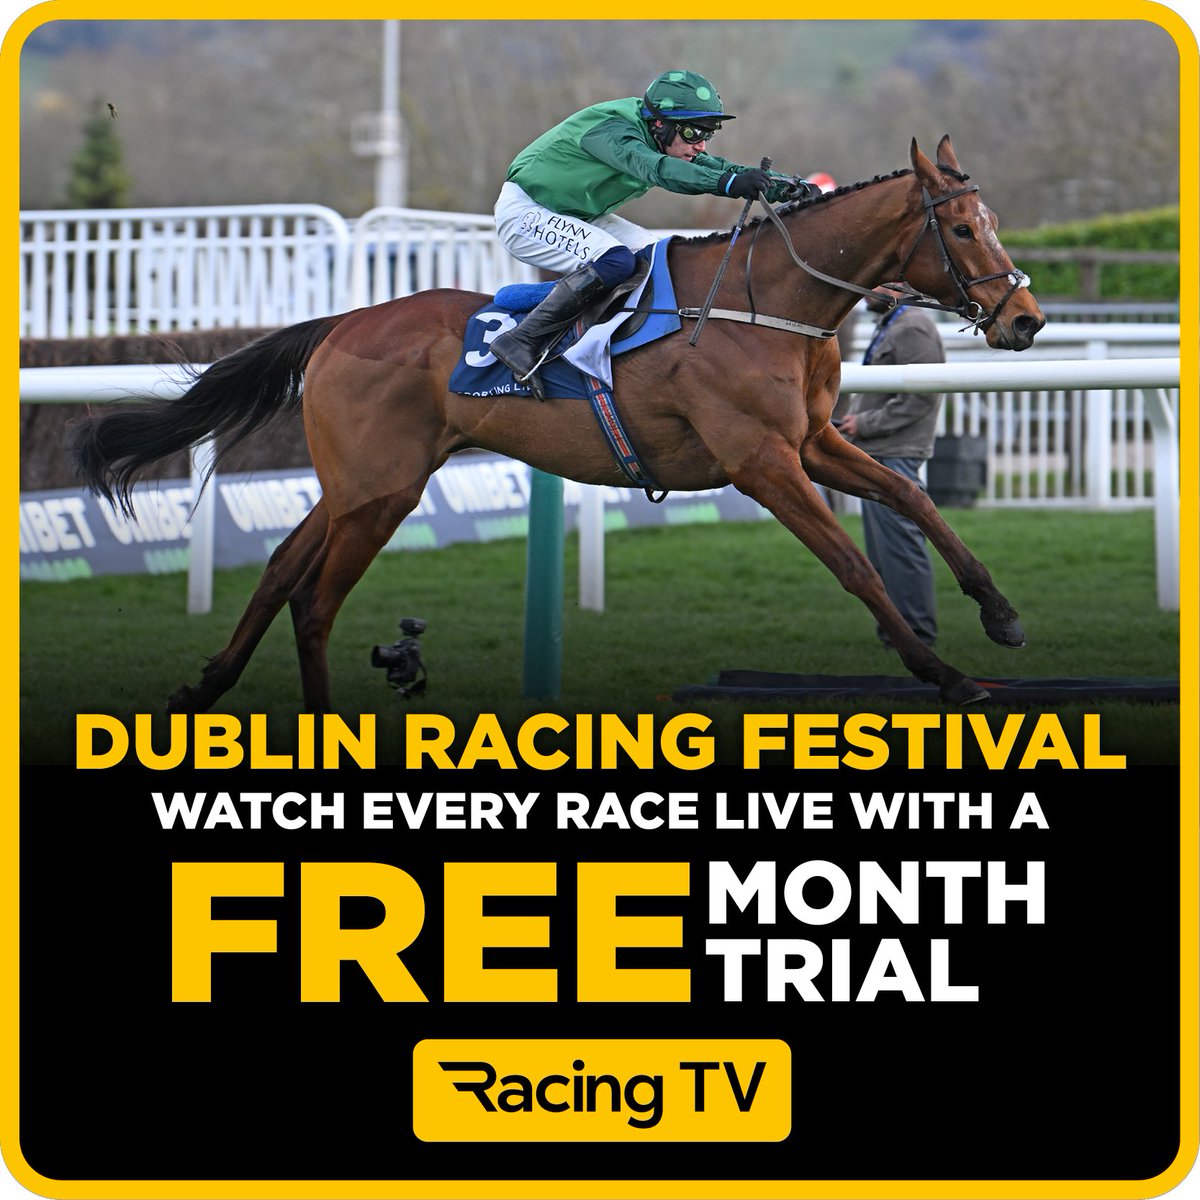 LAST CHANCE – get a free month trial of @RacingTV now & watch every race live from the Dublin Racing Festival > bit.ly/49hSt6E